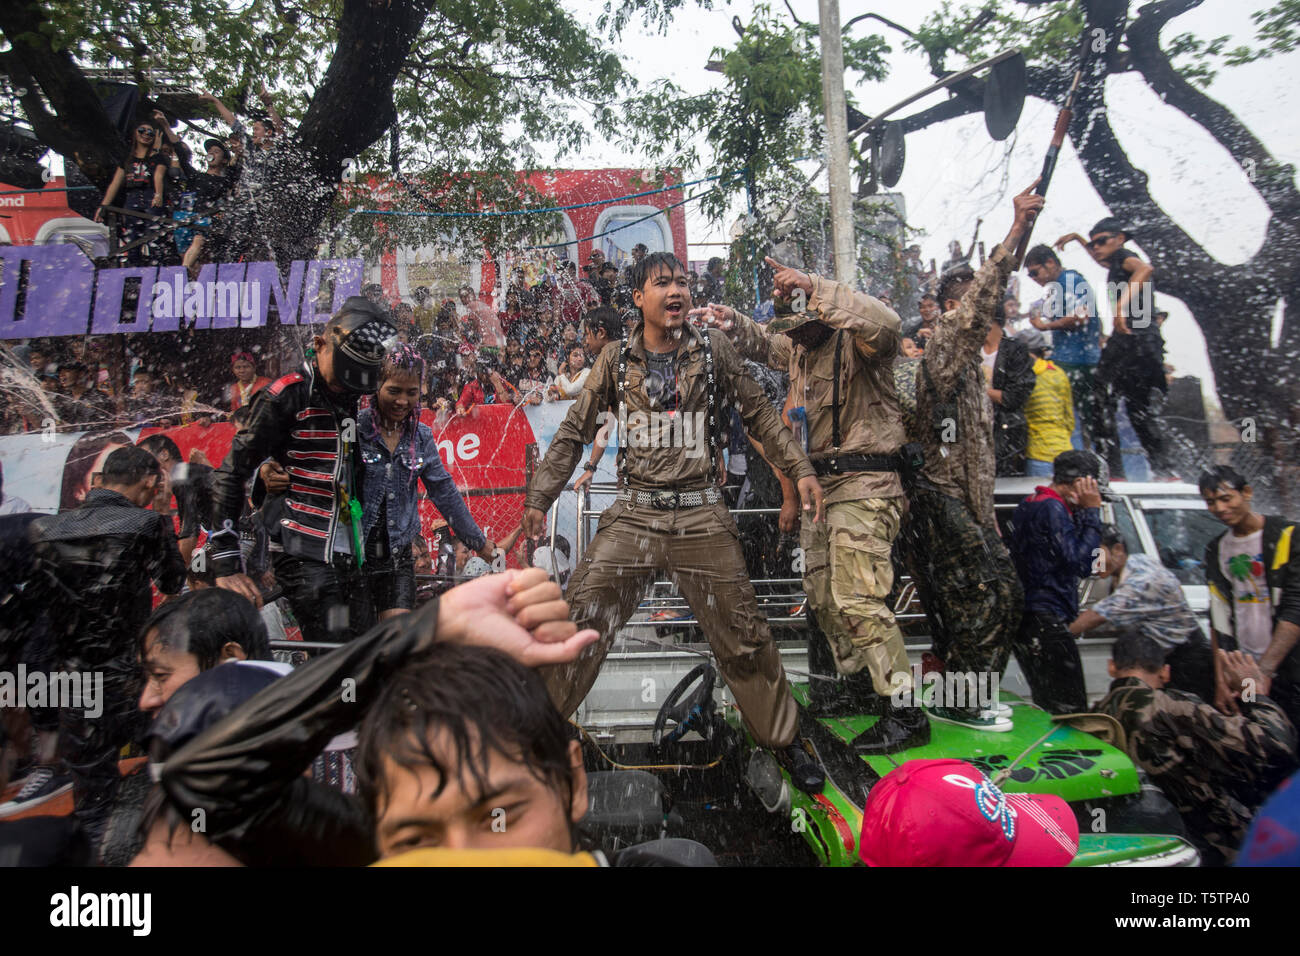 Crowd of people getting wet and having fun in the Thingyan Burmese New Year Festival in Mandalay, Myanmar. Stock Photo